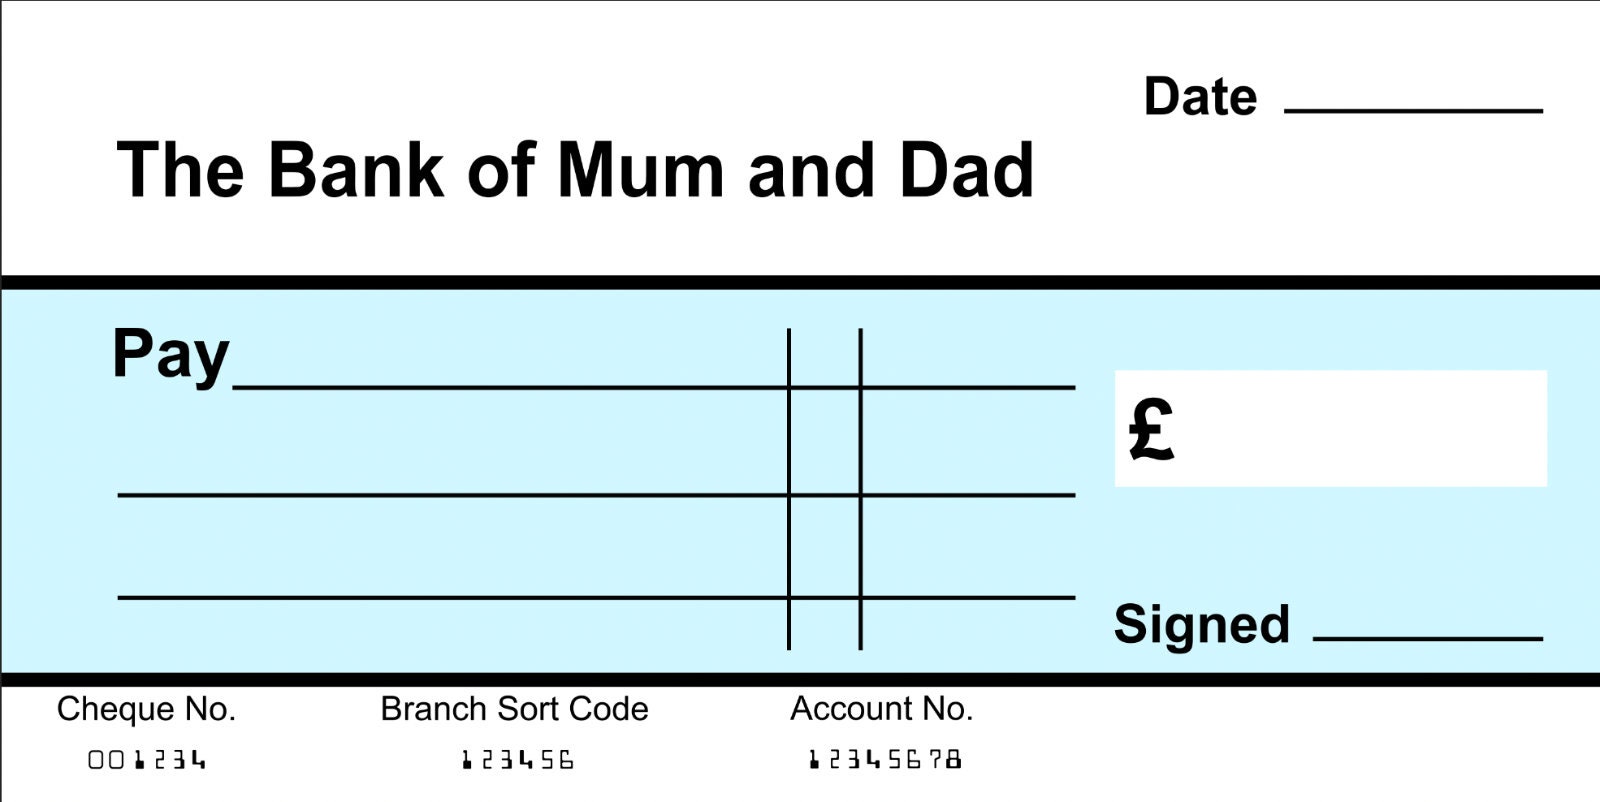 extra-large-giant-blank-cheque-bank-of-mum-dad-check-fun-etsy-uk